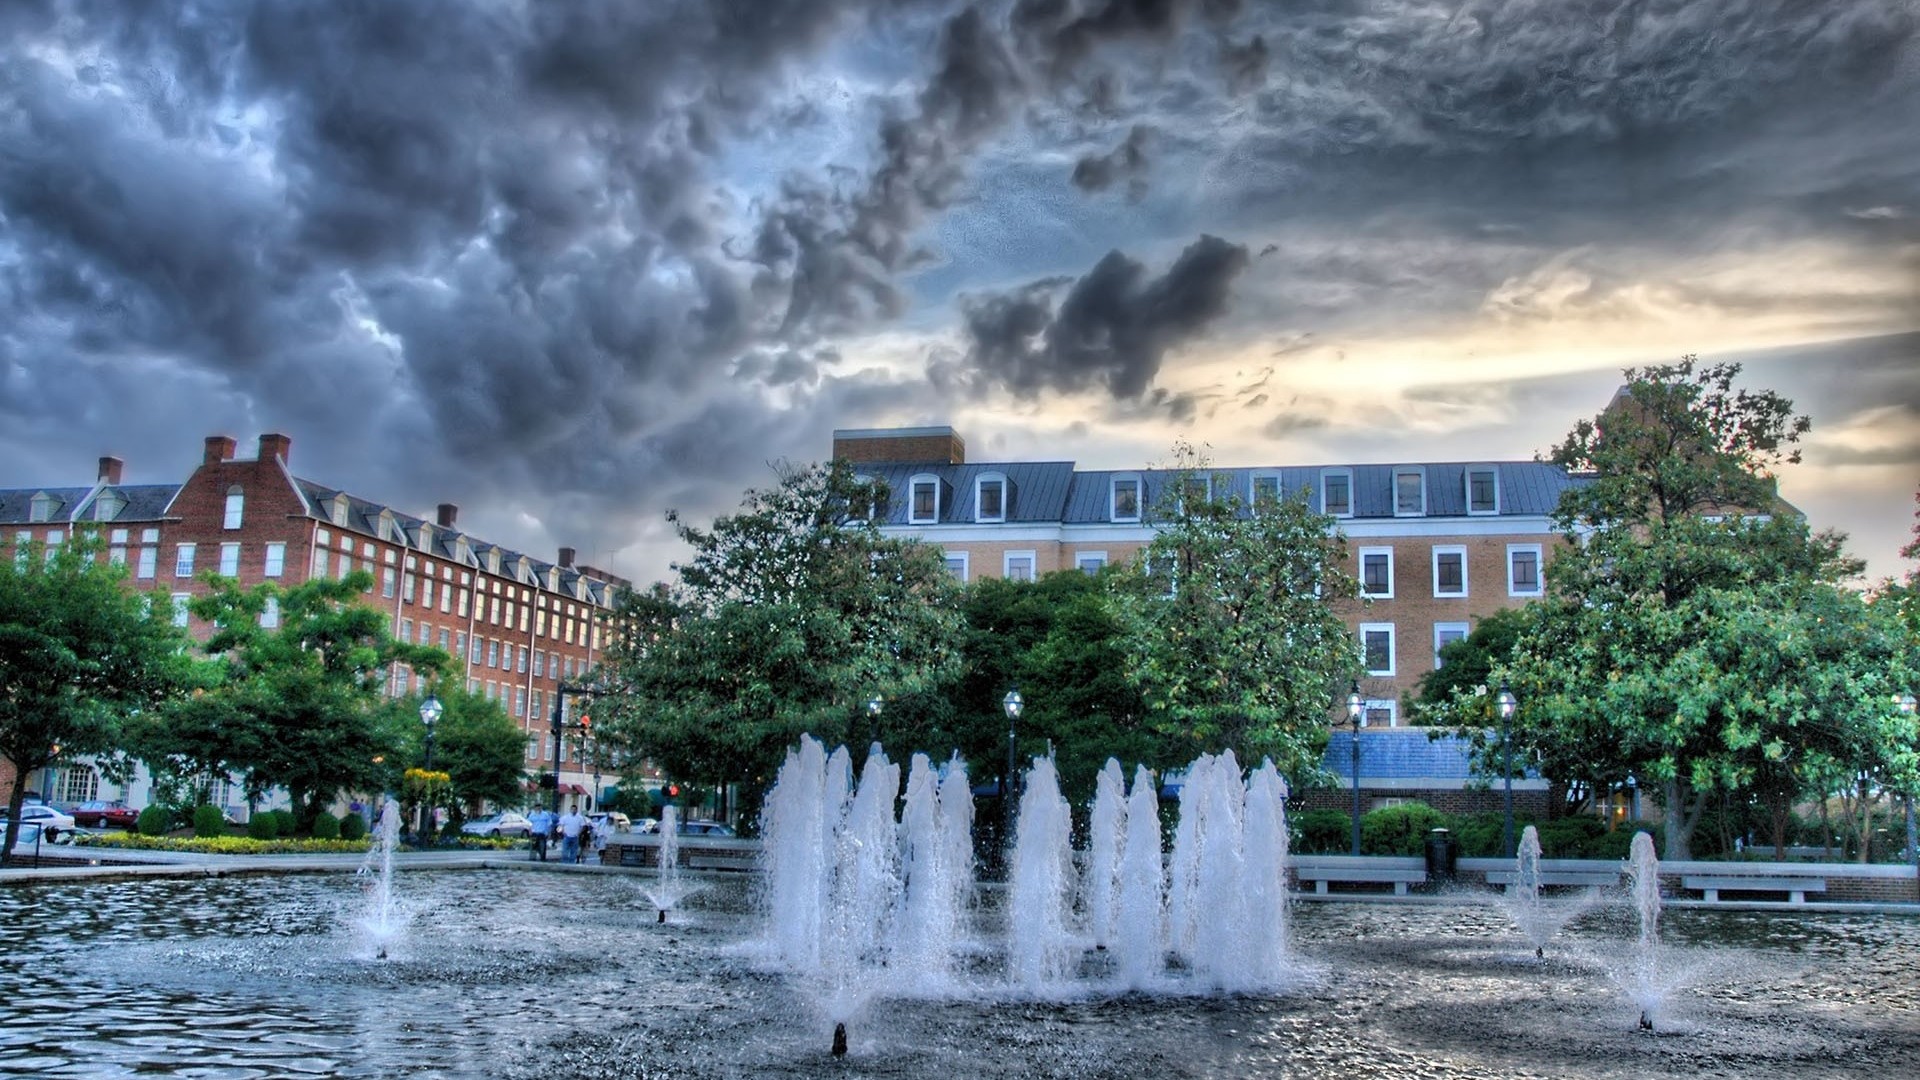 1920x1080  Wallpaper fountain, building, trees, water, hdr